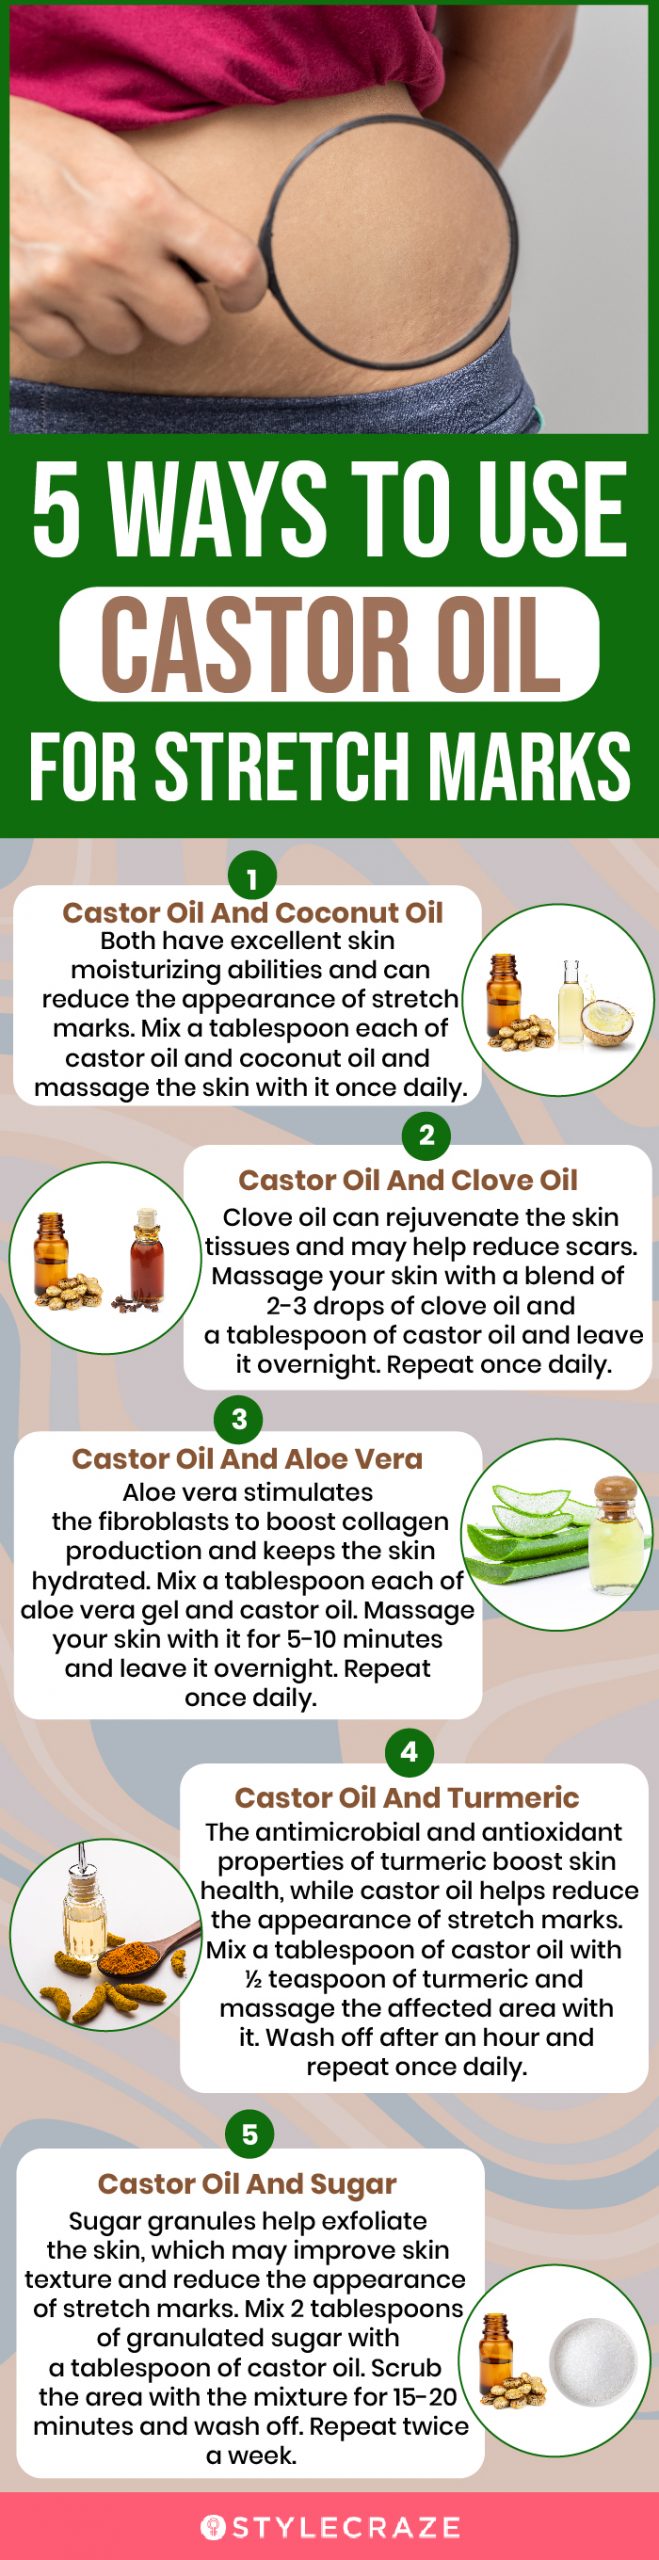 5 ways to use castor oil for stretch marks (infographic)